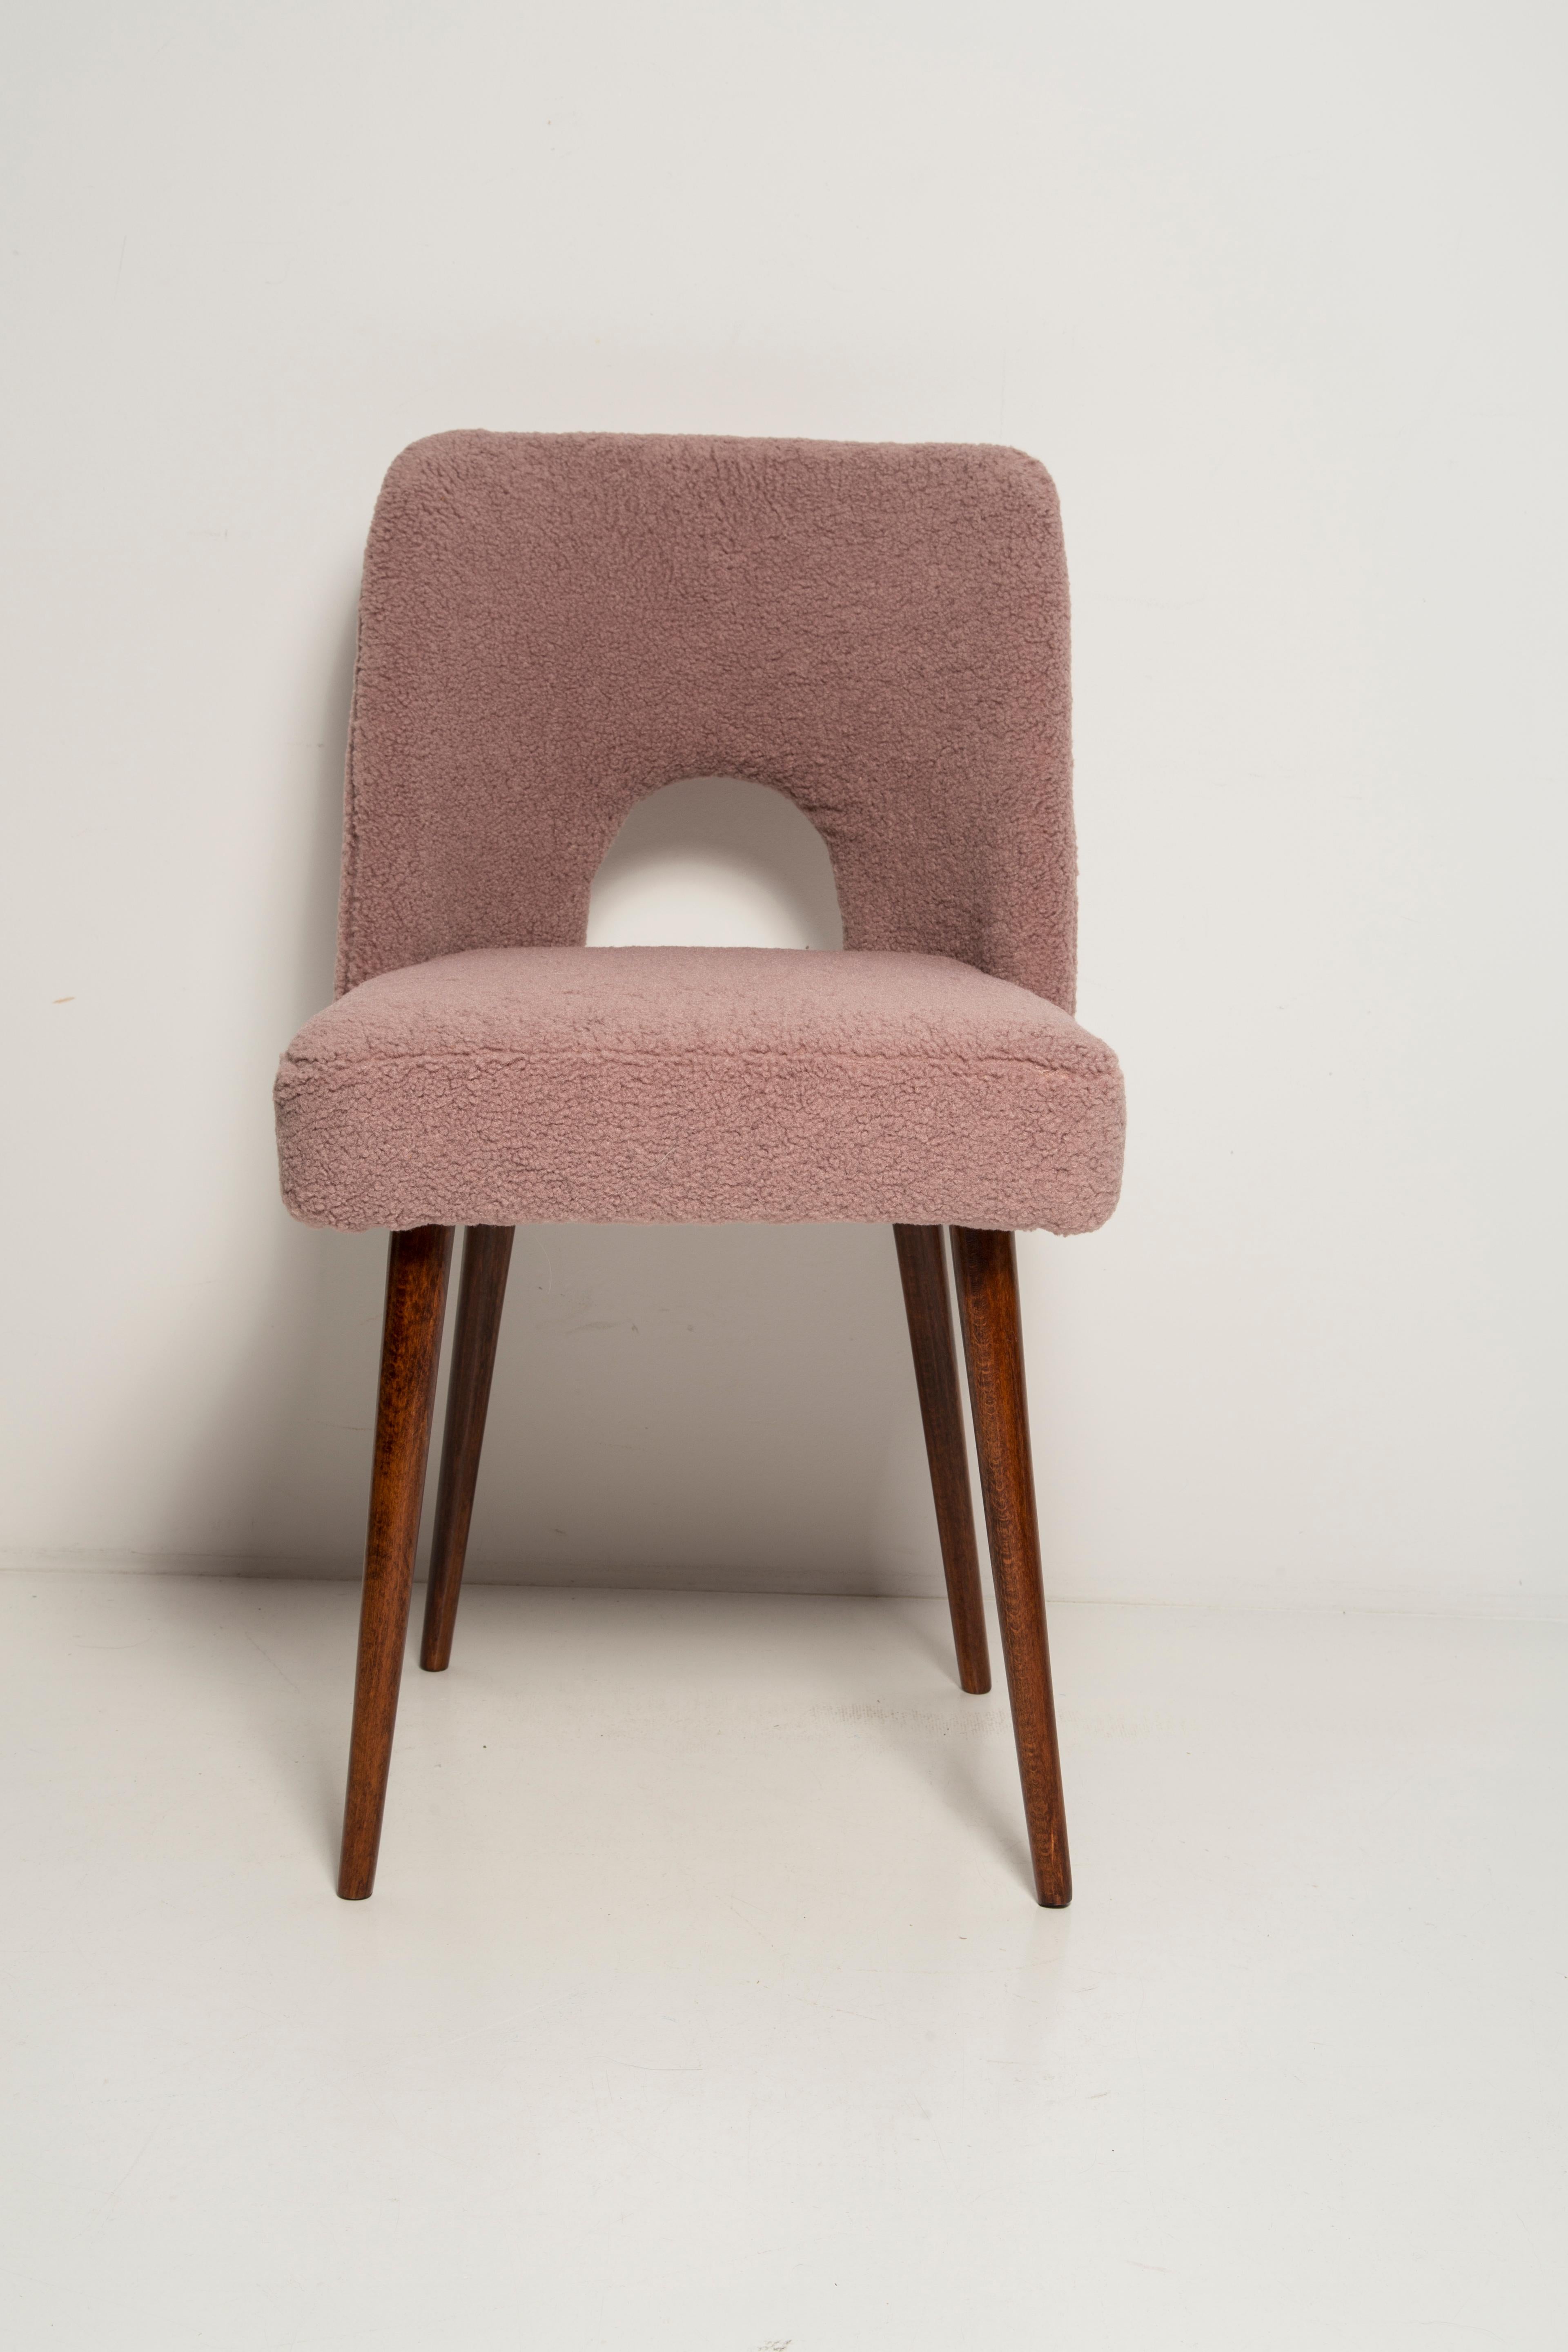 Set of Eight Pink Boucle 'Shell' Chairs, Europe, 1960s For Sale 3